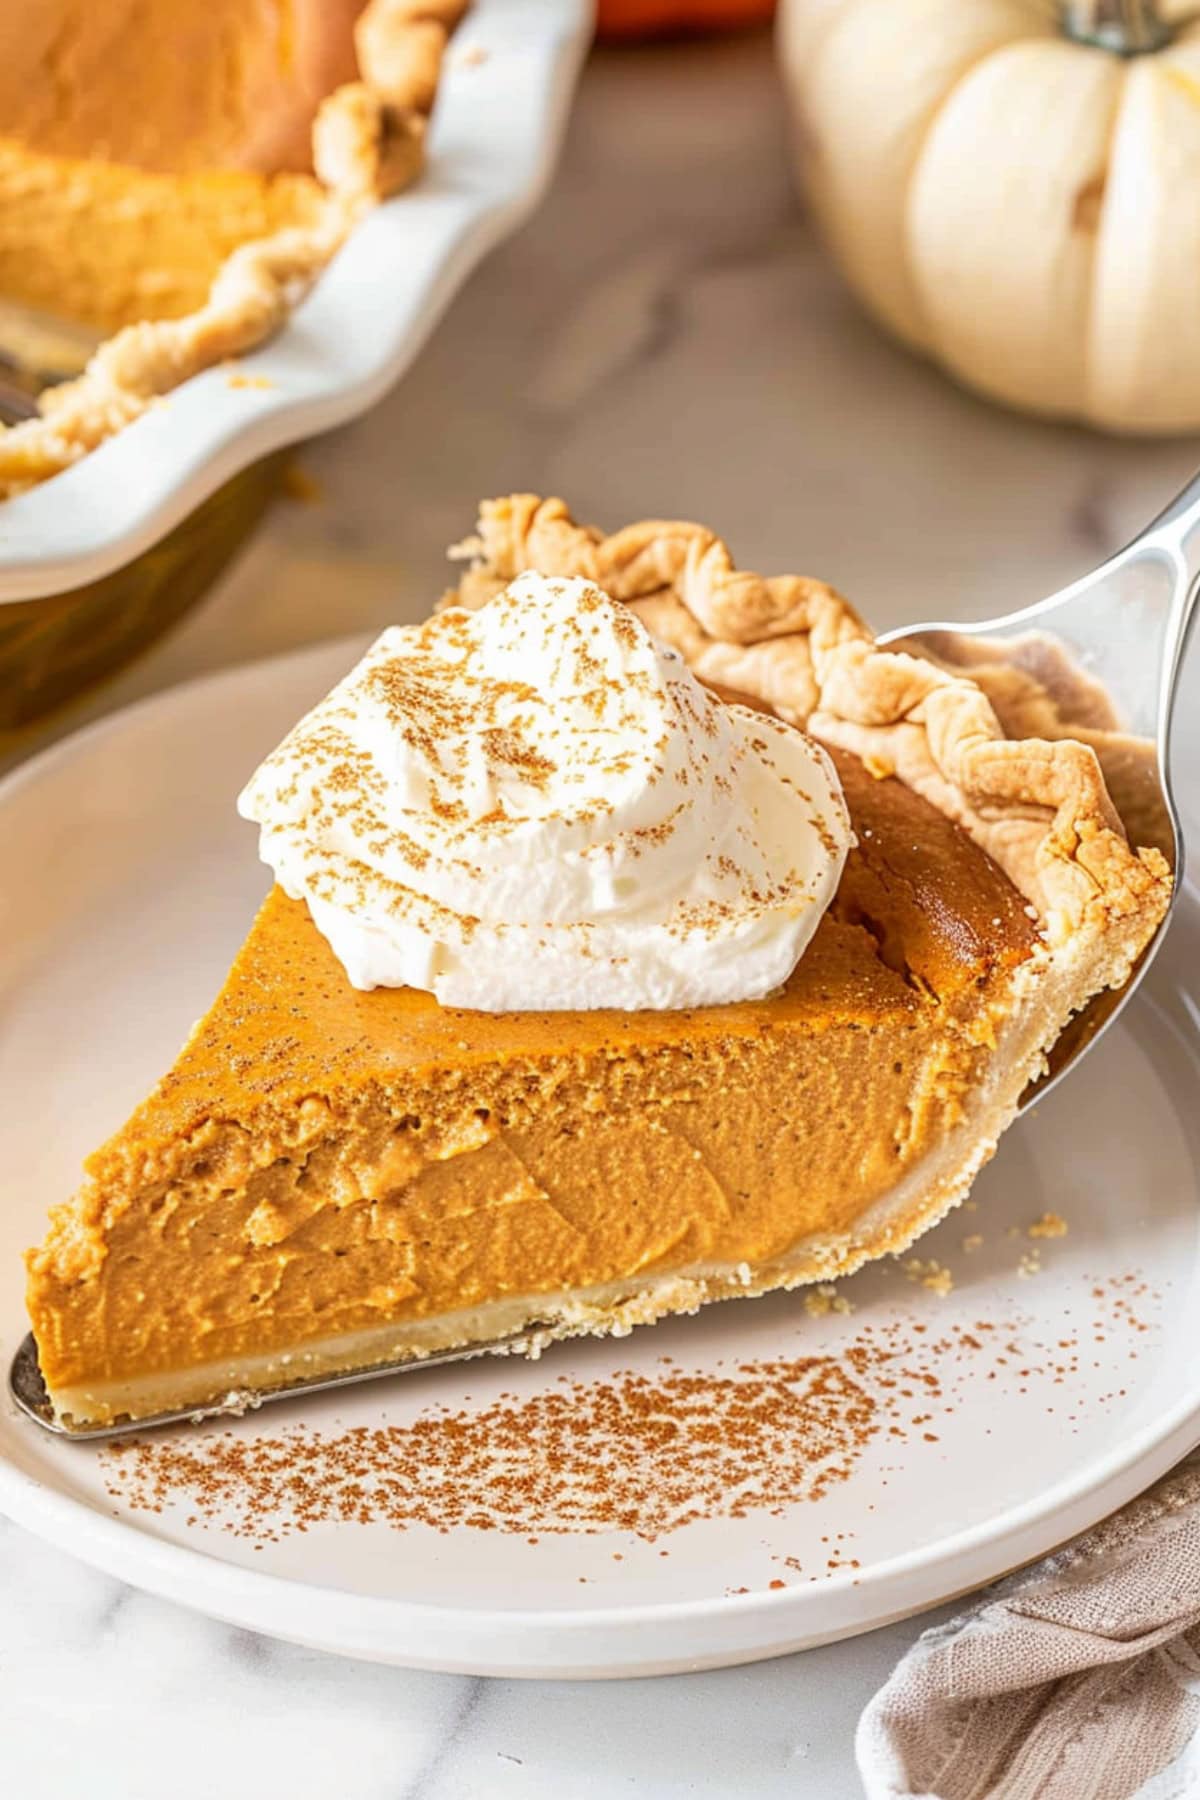 Pie ladle with a slice of pumpkin cream pie serving on a white plate.